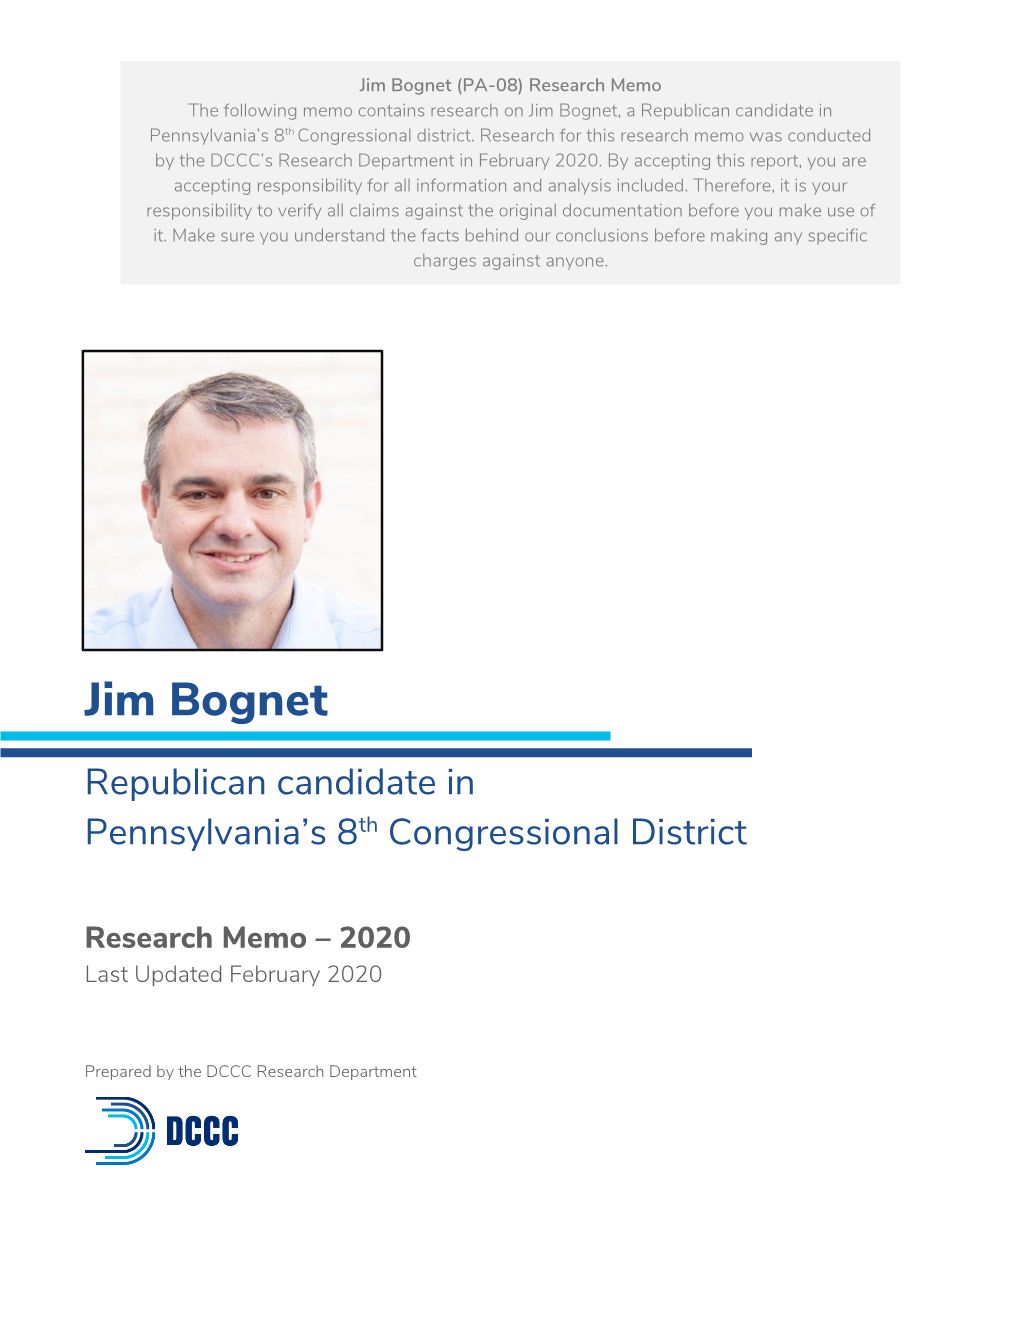 Jim Bognet (PA-08) Research Memo the Following Memo Contains Research on Jim Bognet, a Republican Candidate in Pennsylvania’S 8Th Congressional District